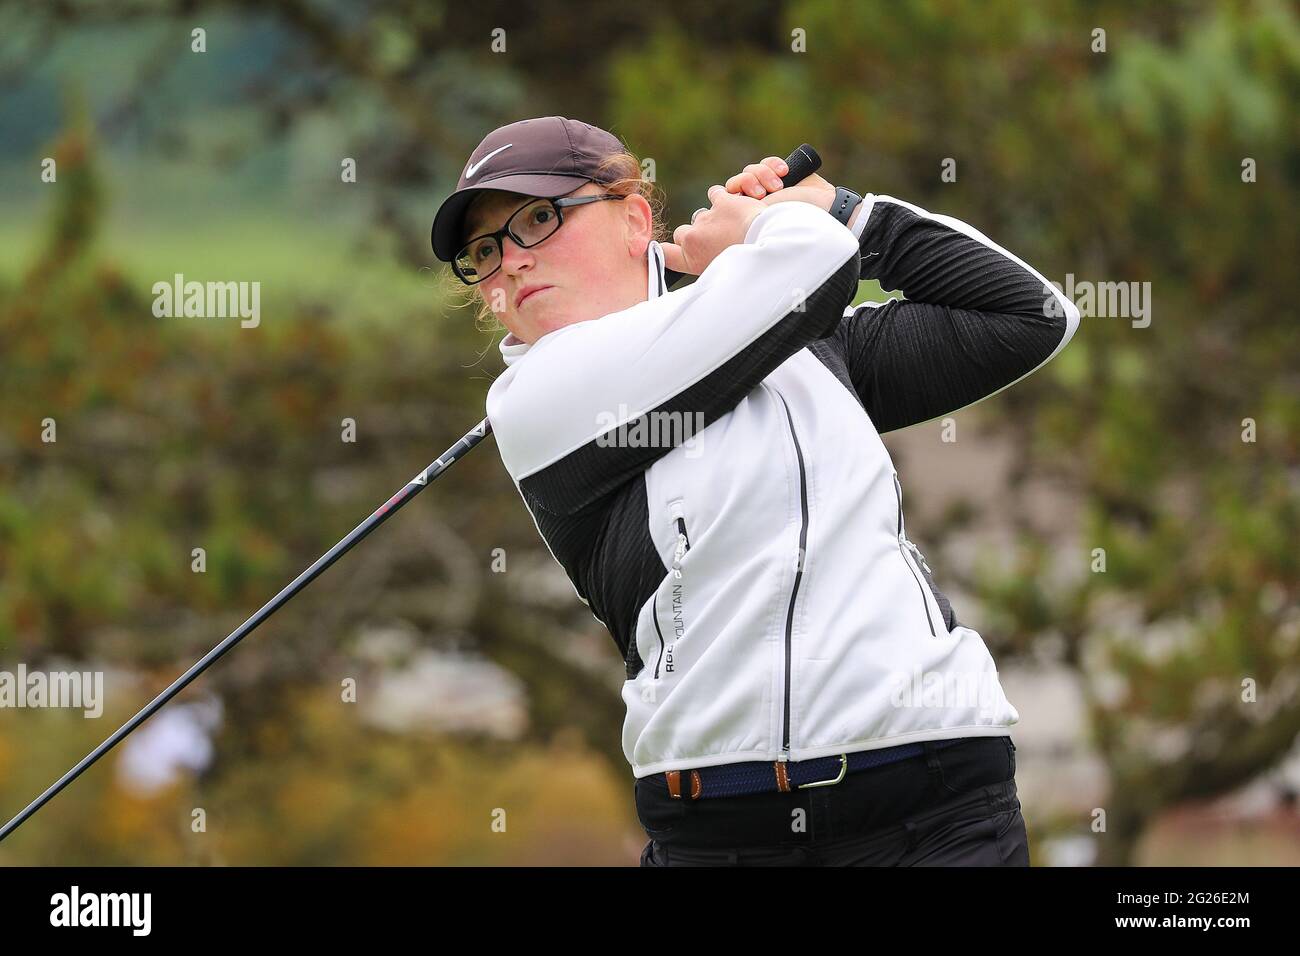 Troon, UK. 8th June, 2021. KATIE WARREN from England teeing off at the 17th tee on Barassie LInks, Troon during the women's open championship organised by the R and A. Credit: Findlay/Alamy News Credit: Findlay/Alamy Live News Stock Photo